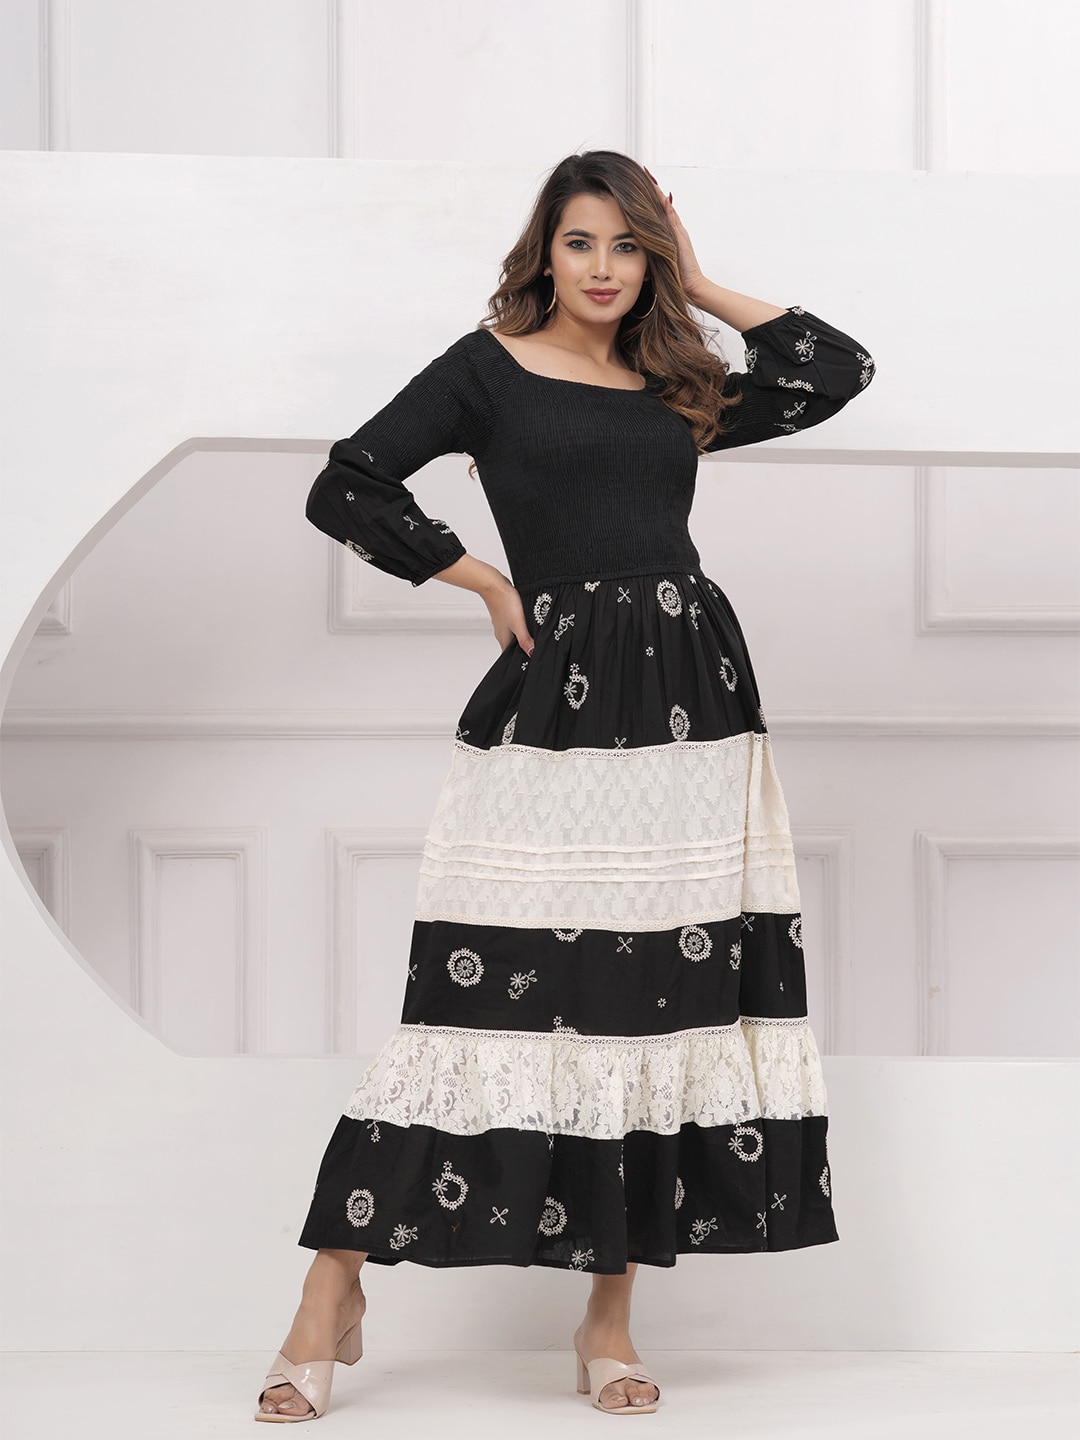 Hatheli Black Ethnic Motifs Embroidered Off-Shoulder Puff Sleeve Fit & Flare Dress Price in India